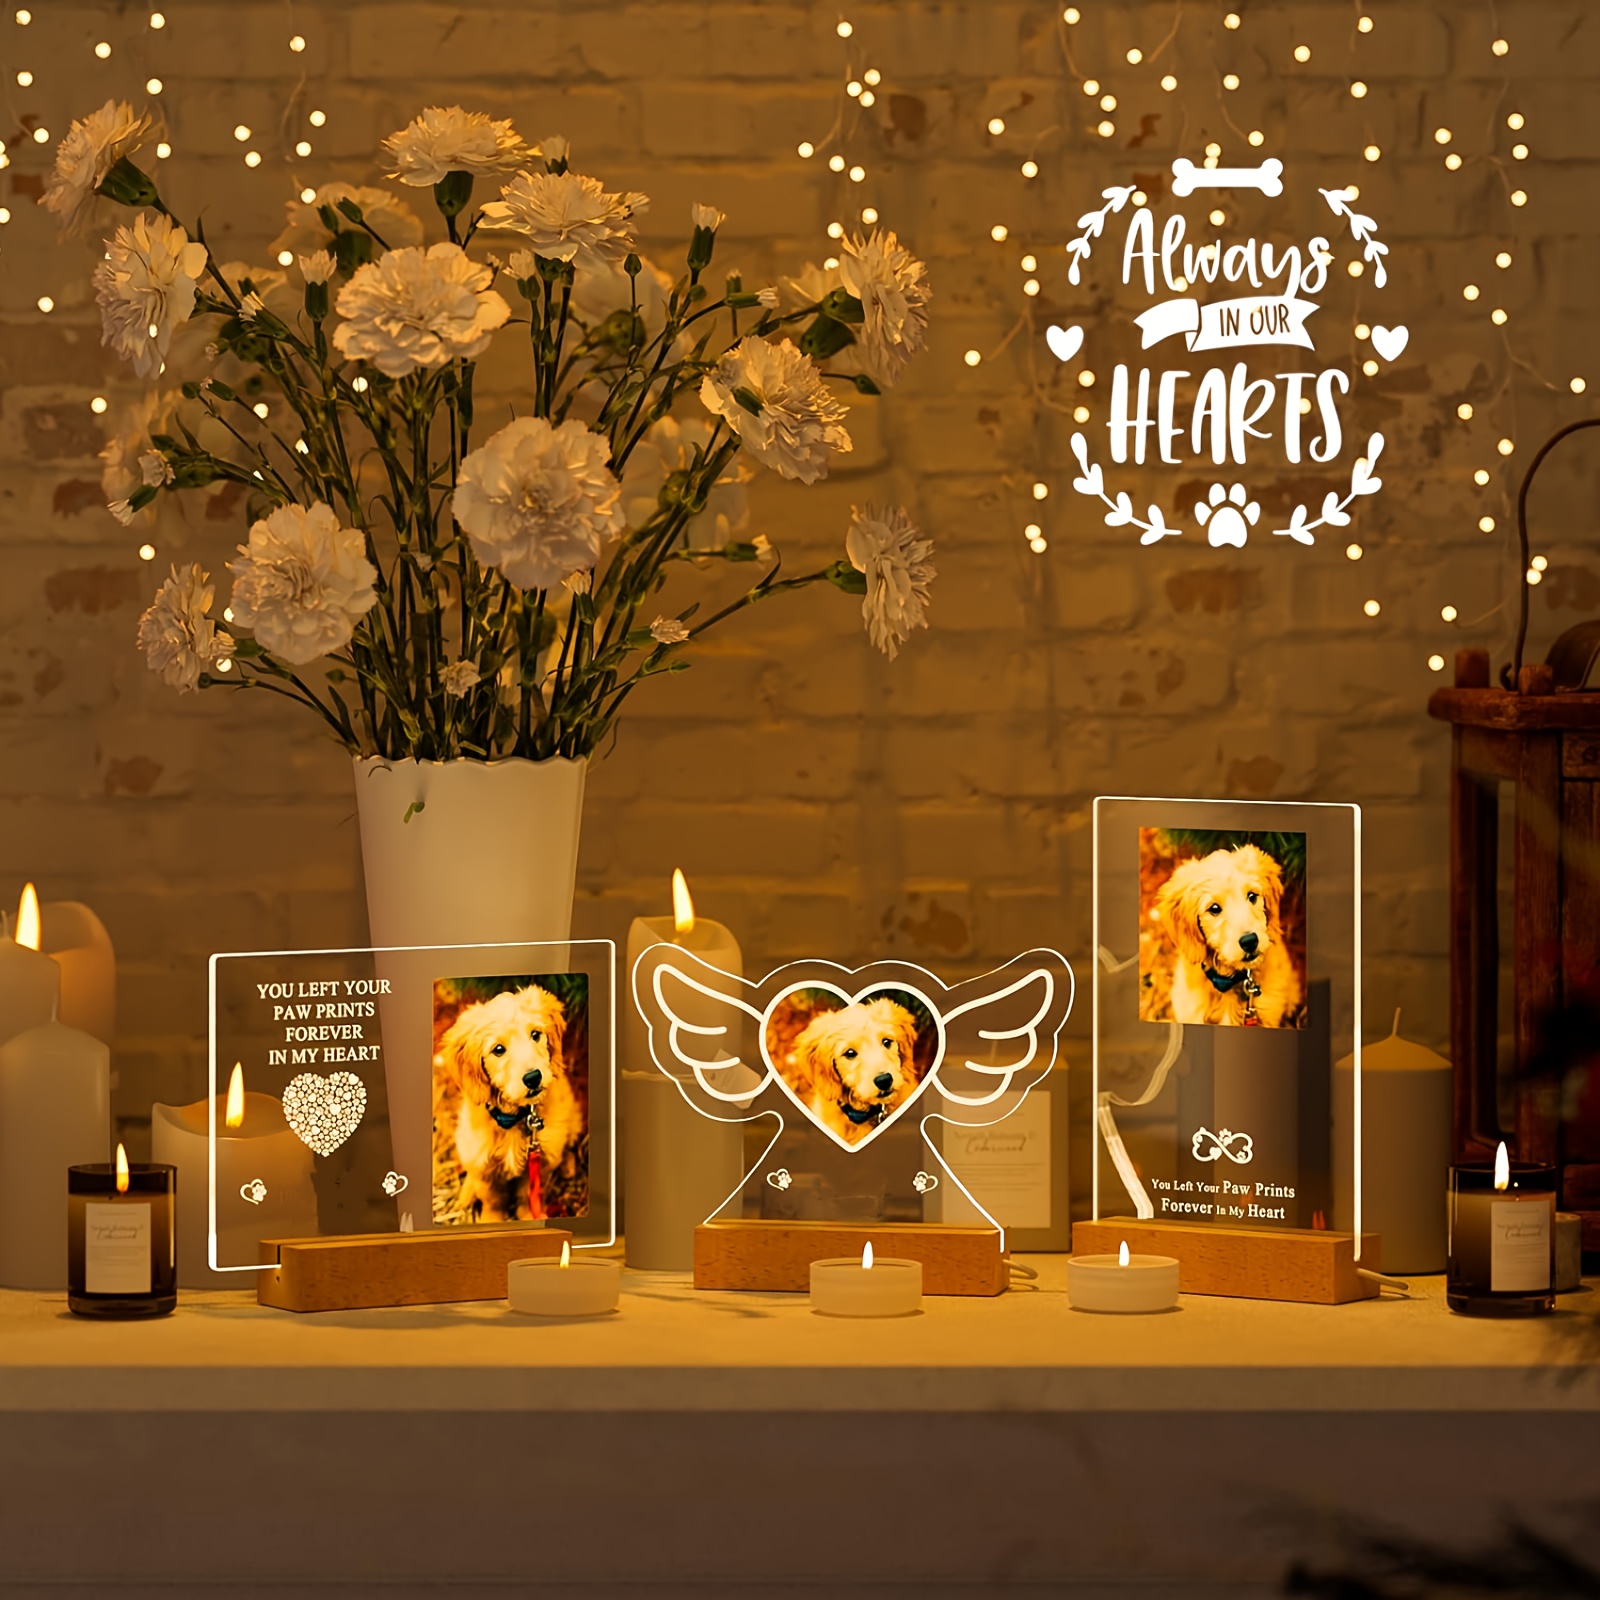 

Customized Personalized Pet Memorial Night Light Gift, Dog Memorial Gift, Pet Loss Gift, Customized Dog Memorial Plaque, Cat Memorial Photo Frame, Pet Sympathy Gift